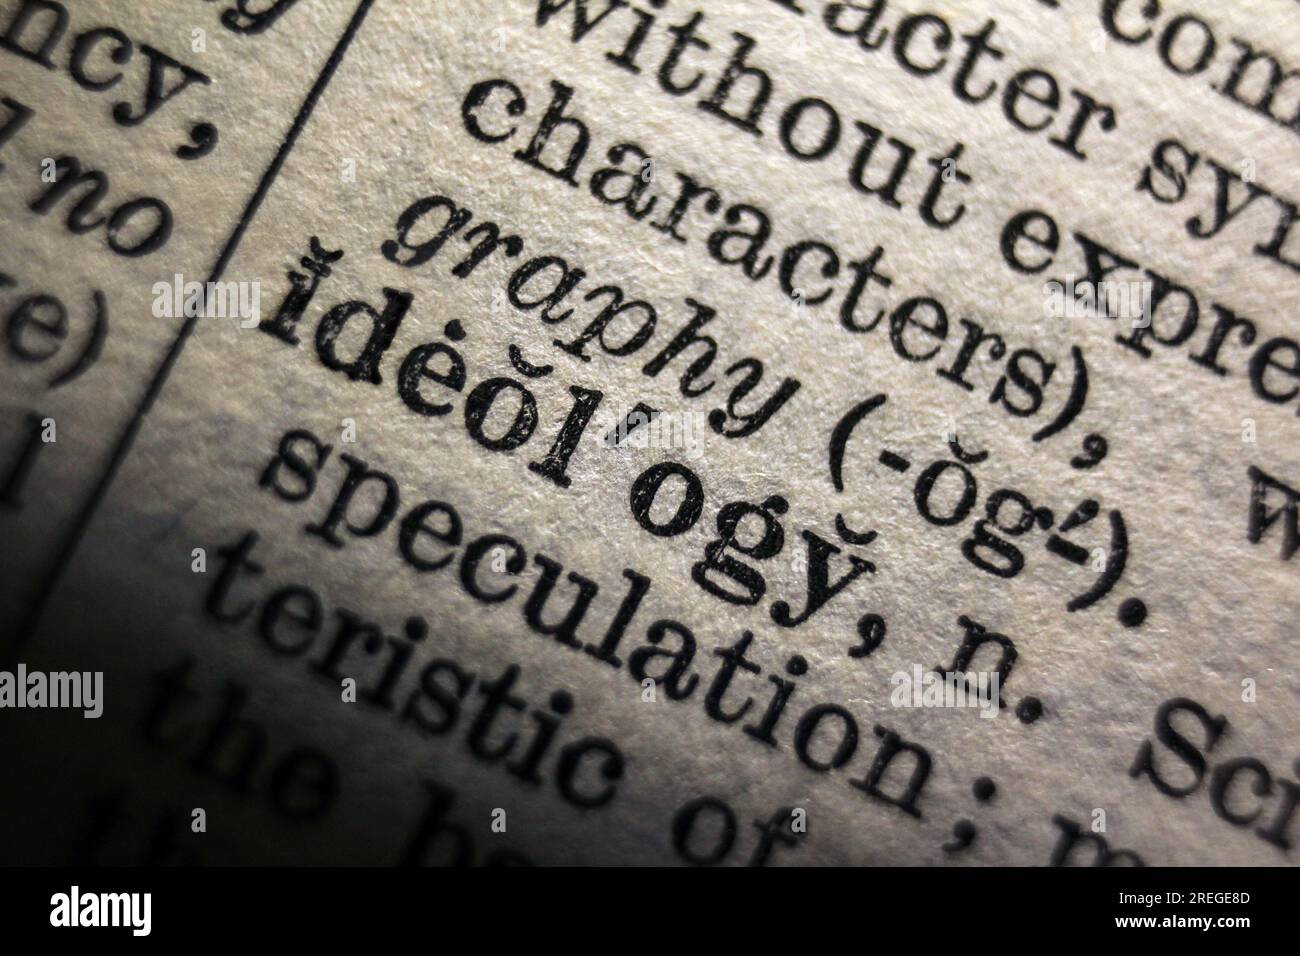 Definition of word ideology on dictionary page, close-up Stock Photo